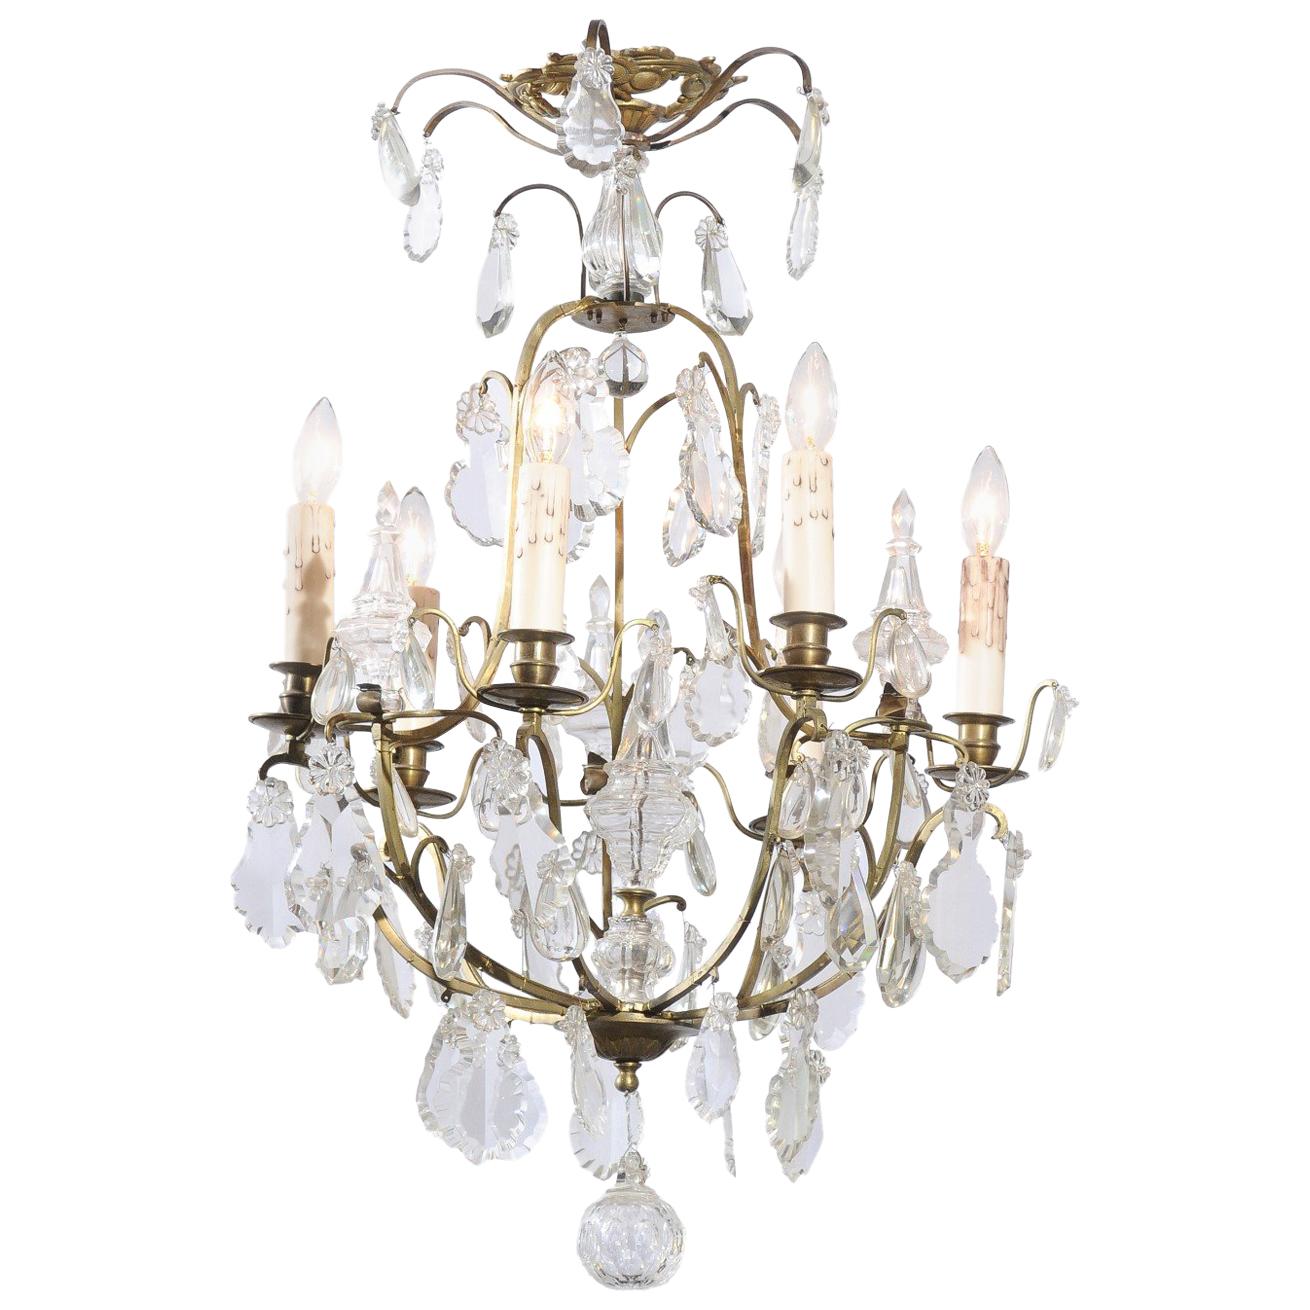 French 19th Century Six-Light Crystal Chandelier with Scrolled Brass Armature